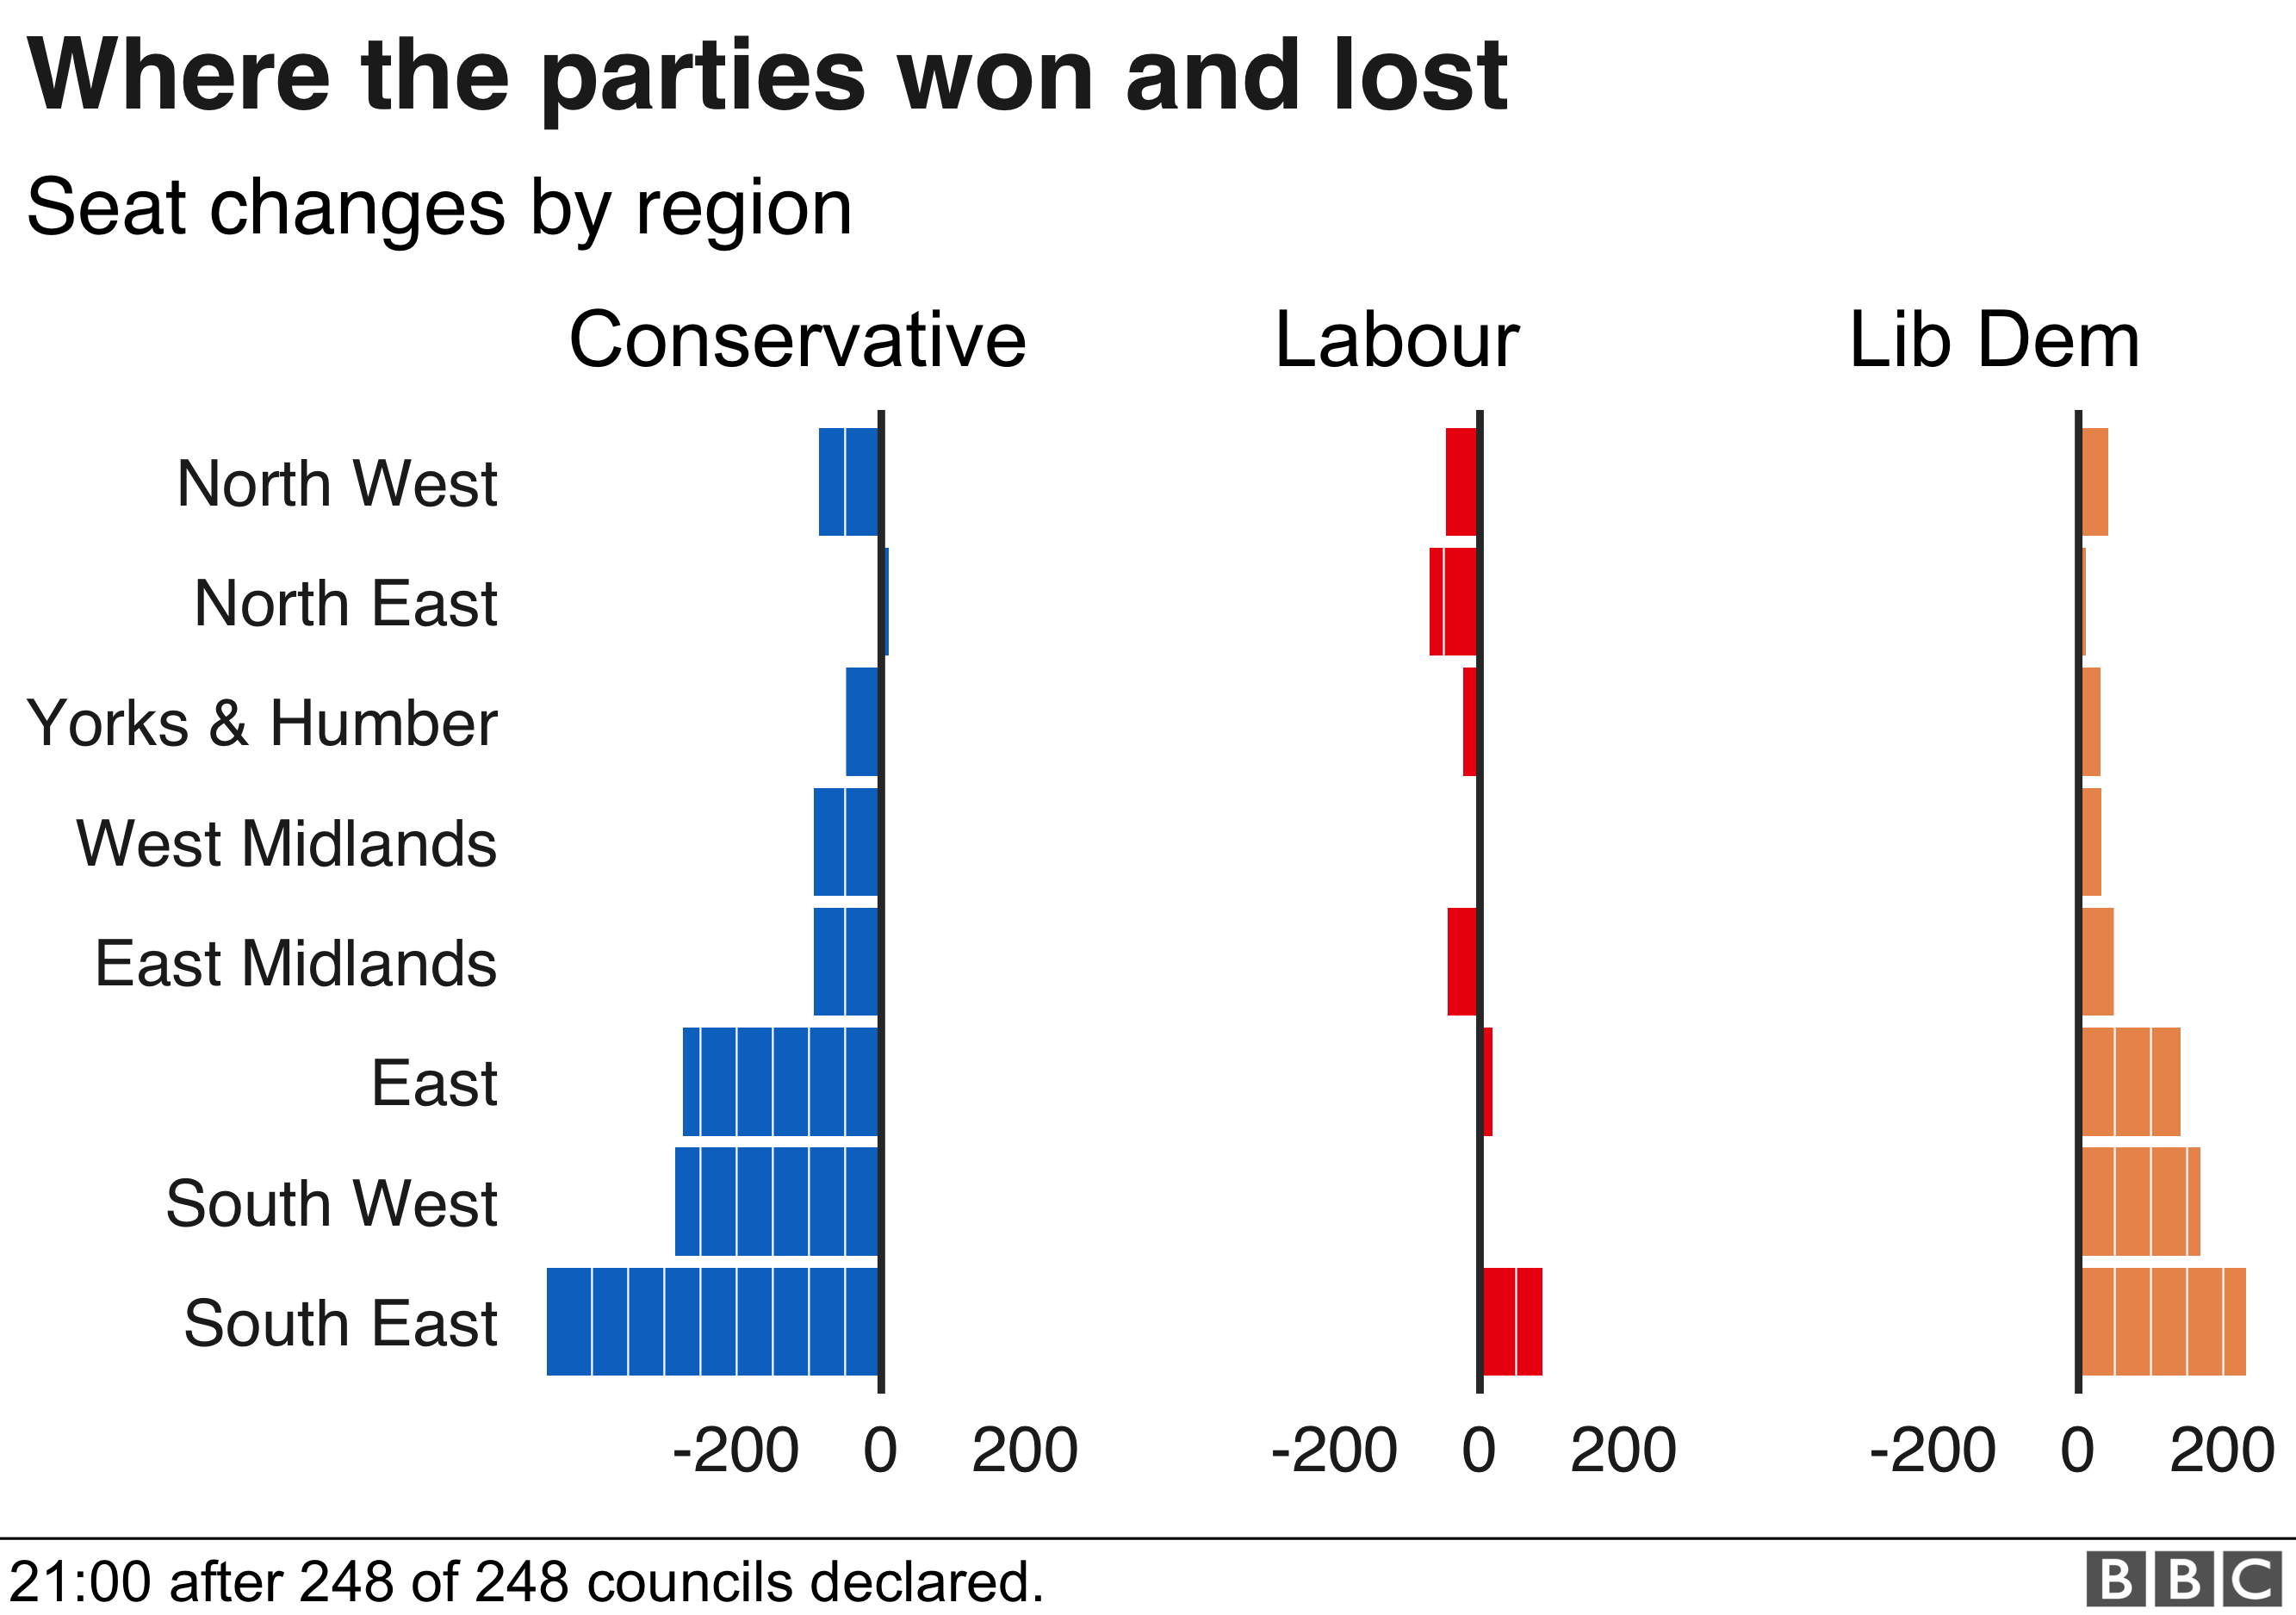 Tories did worst in the East, South East, and South West, areas where the Lib Dems perfromed best